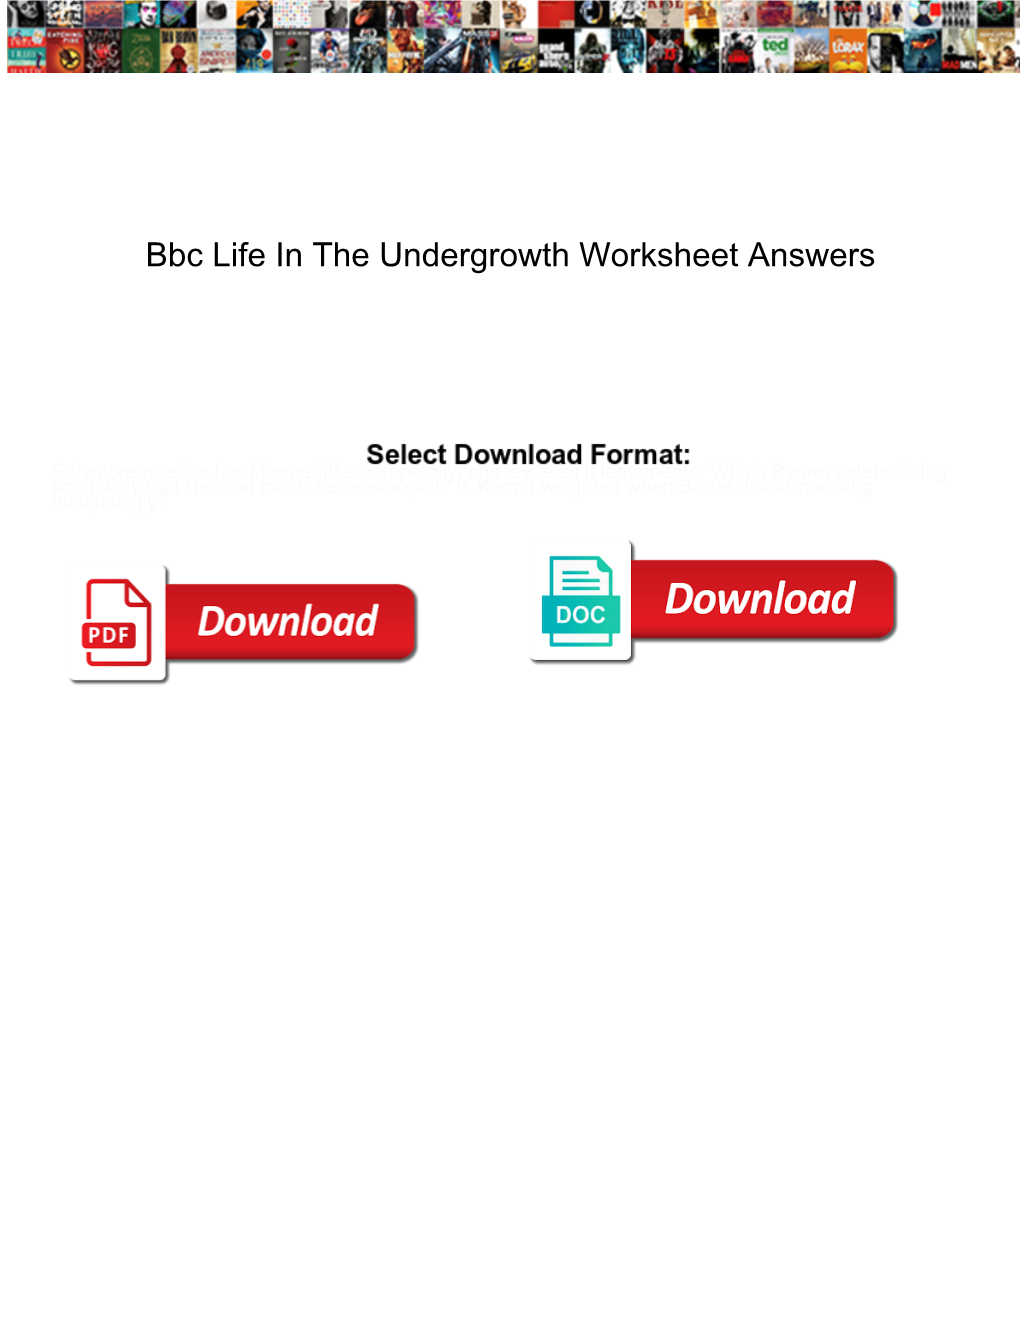 Bbc Life in the Undergrowth Worksheet Answers